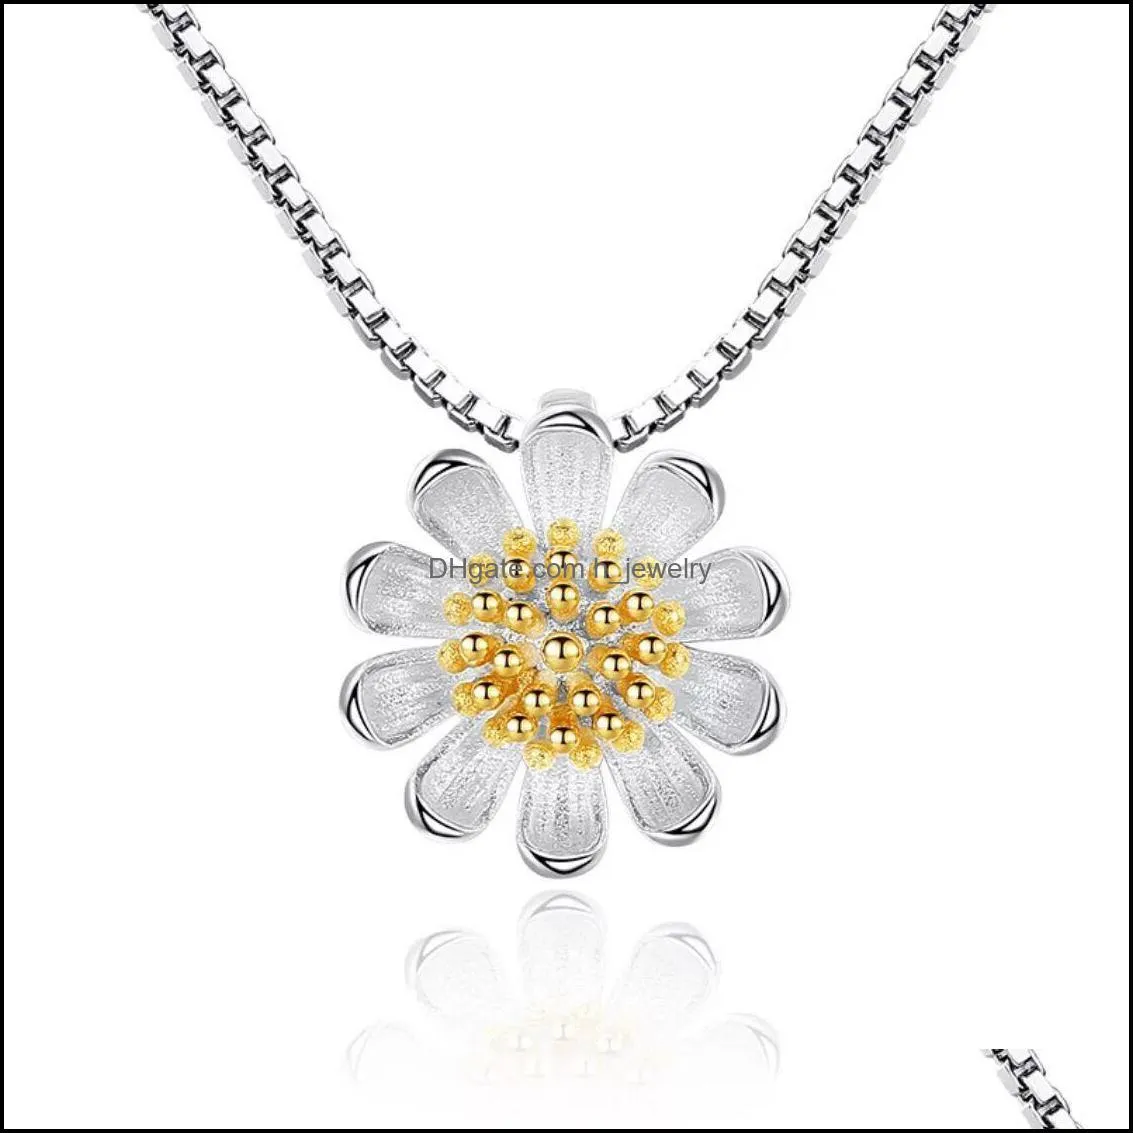 daisy necklace pendant fashion wedding jewelry lovely imitation 925 sterling silver jewelry plated silver necklaces vibrant sun flower hjewelry